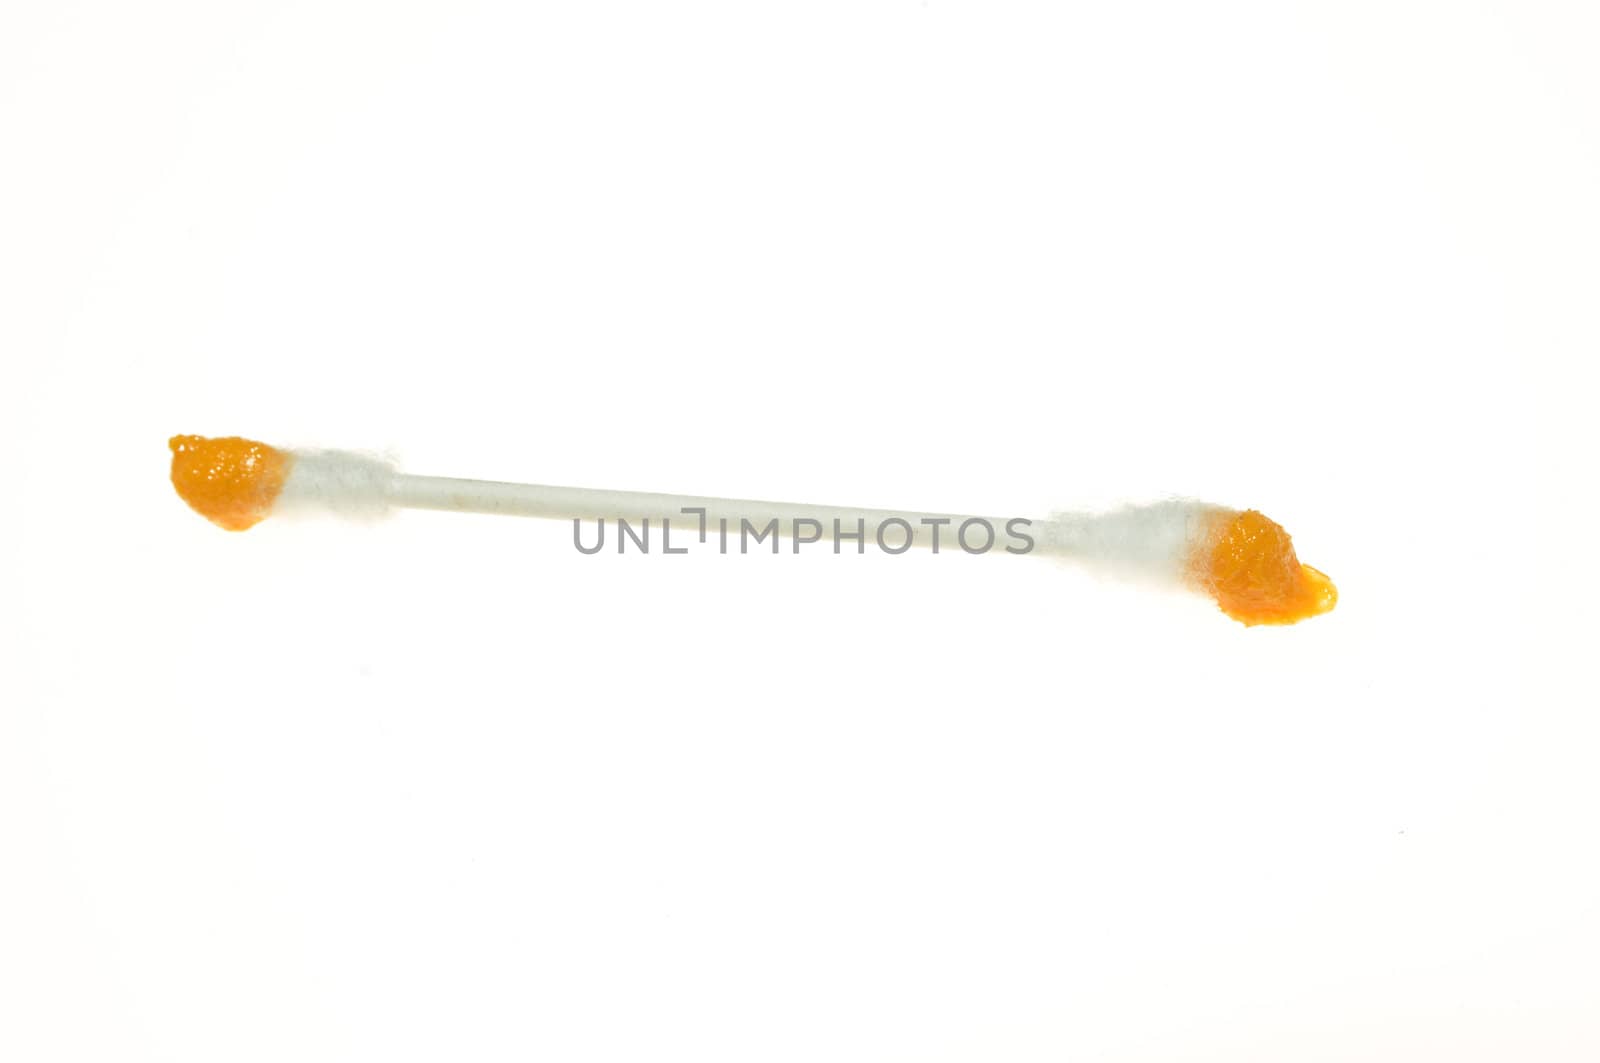 Cotton swab with ear wax at both ends
